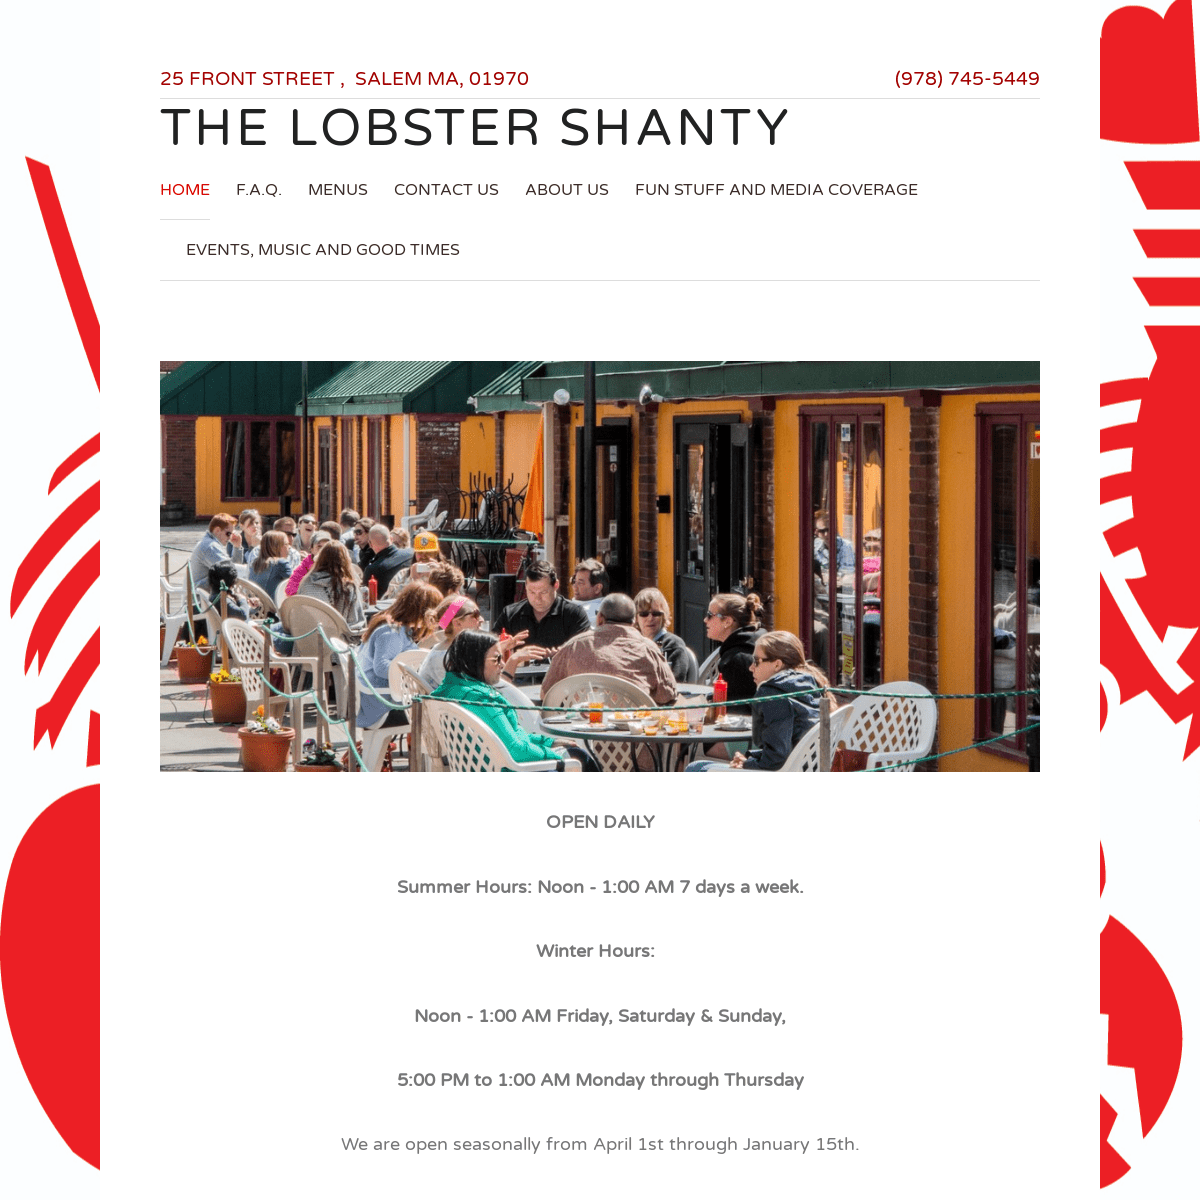 The Lobster Shanty